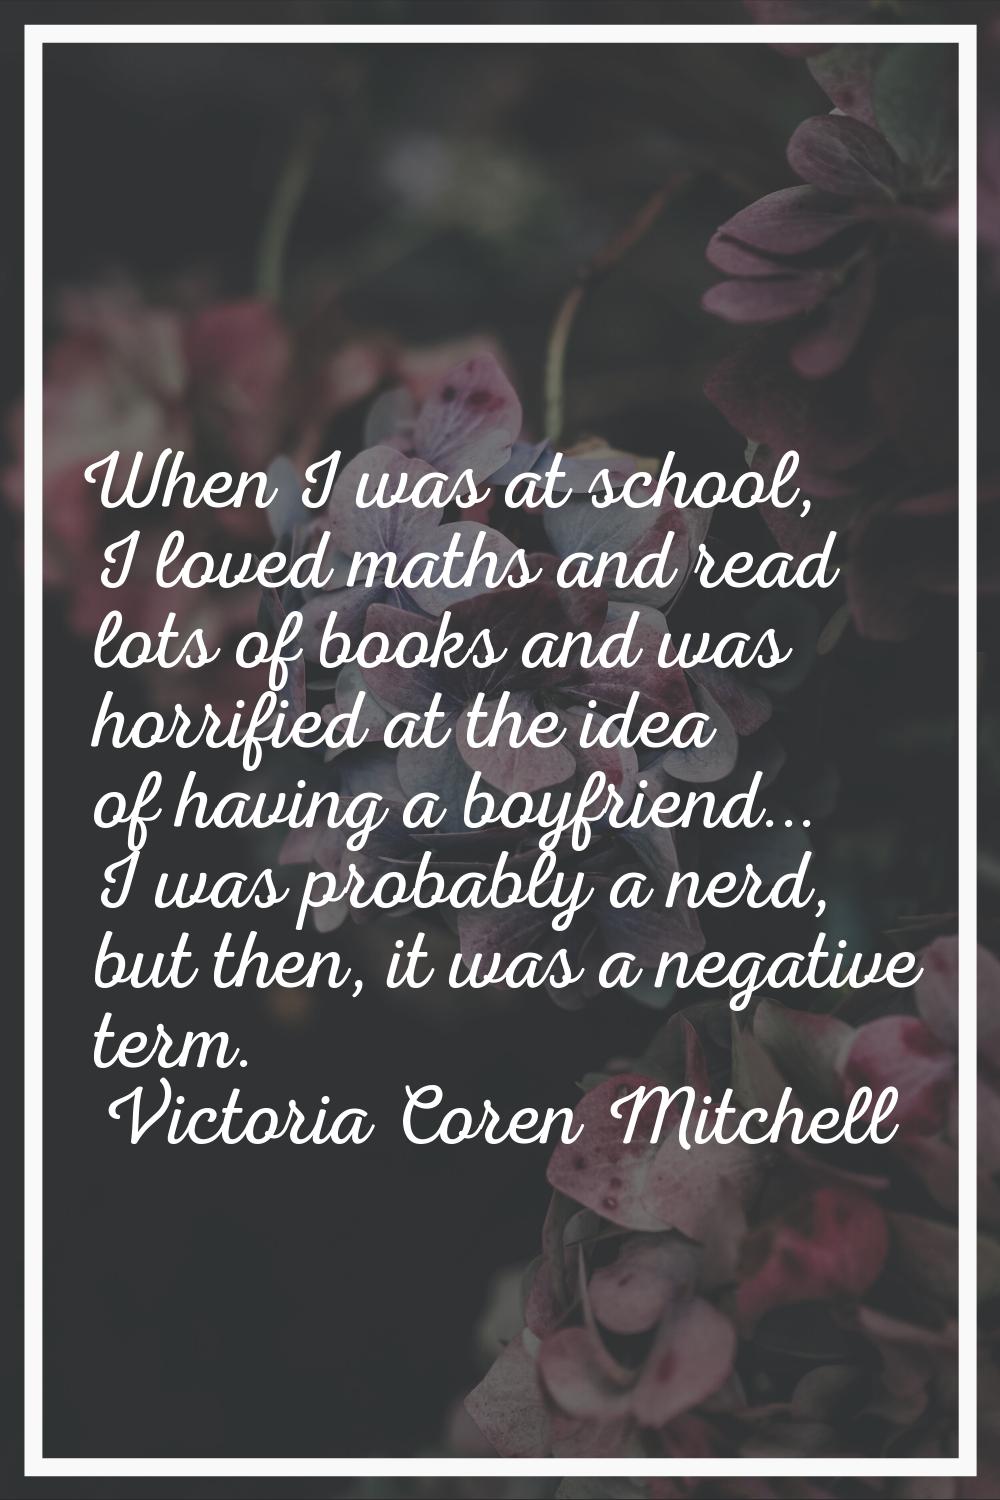 When I was at school, I loved maths and read lots of books and was horrified at the idea of having 